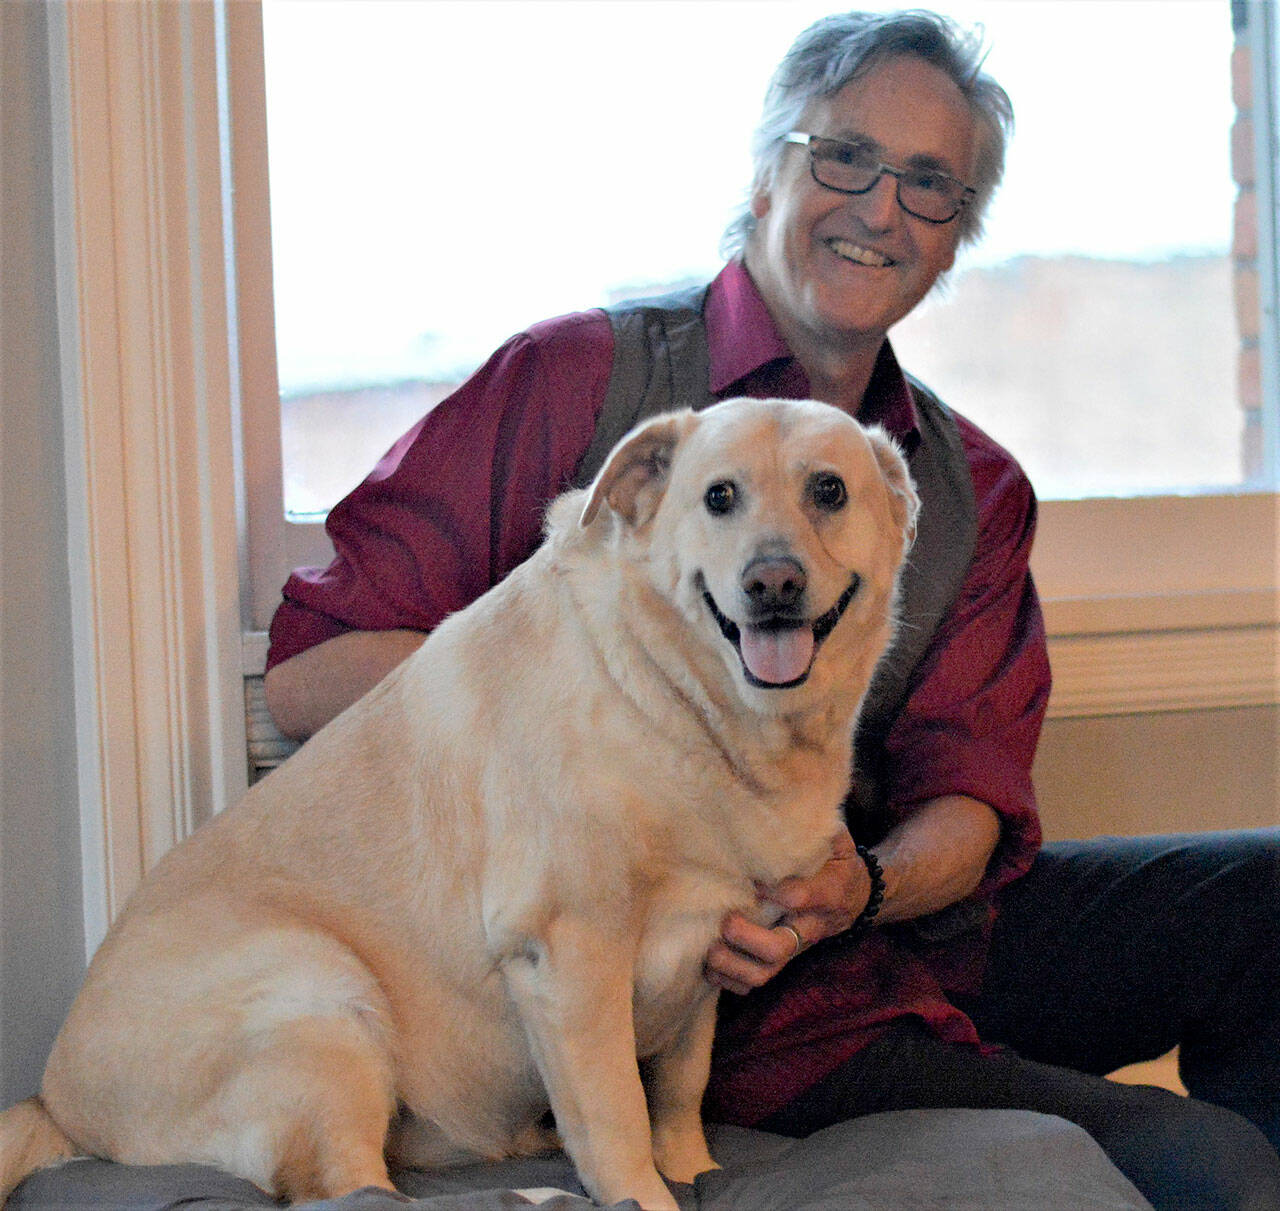 Author Ward Serrill and his dog Dolly Parton, 7, share a moment at the Starlight Room, where Serrill will give readings of his new memoir, “To Crack the World Open: Solitude, Alaska and a Dog Named Woody.” (Diane Urbani de la Paz/Peninsula Daily News)